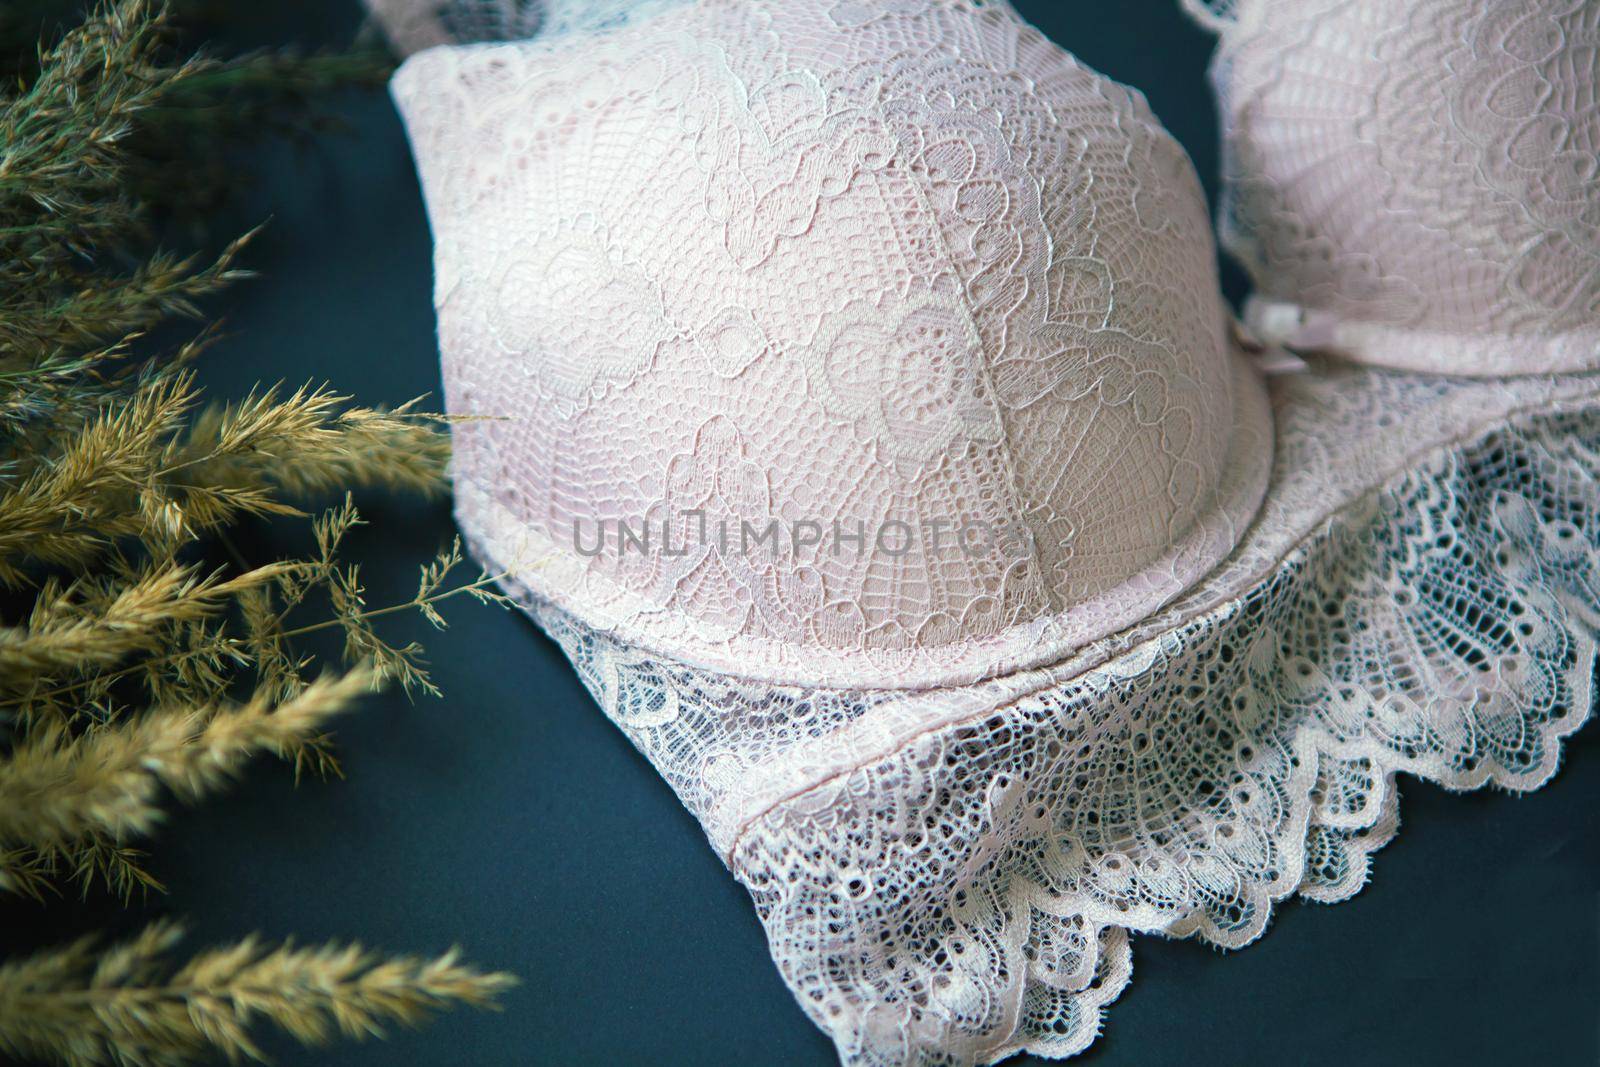 pink bra lace. Womens lingerie close up on black background near pampas grass. fashionable underwear by julija